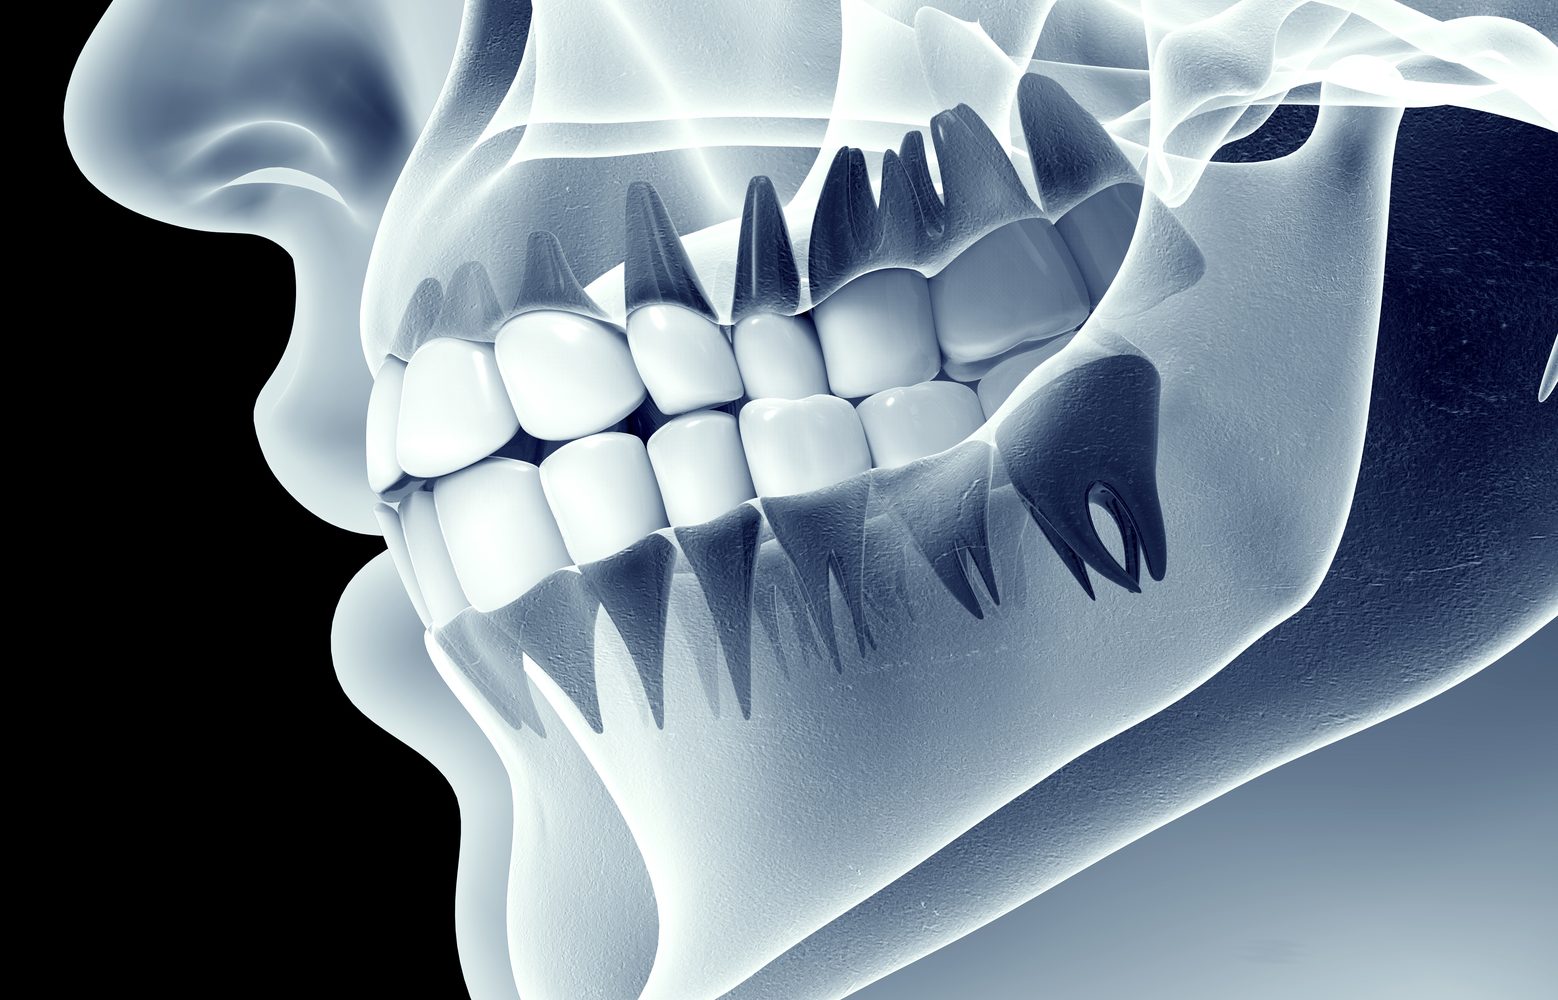 x-ray image of a jaw with teeth